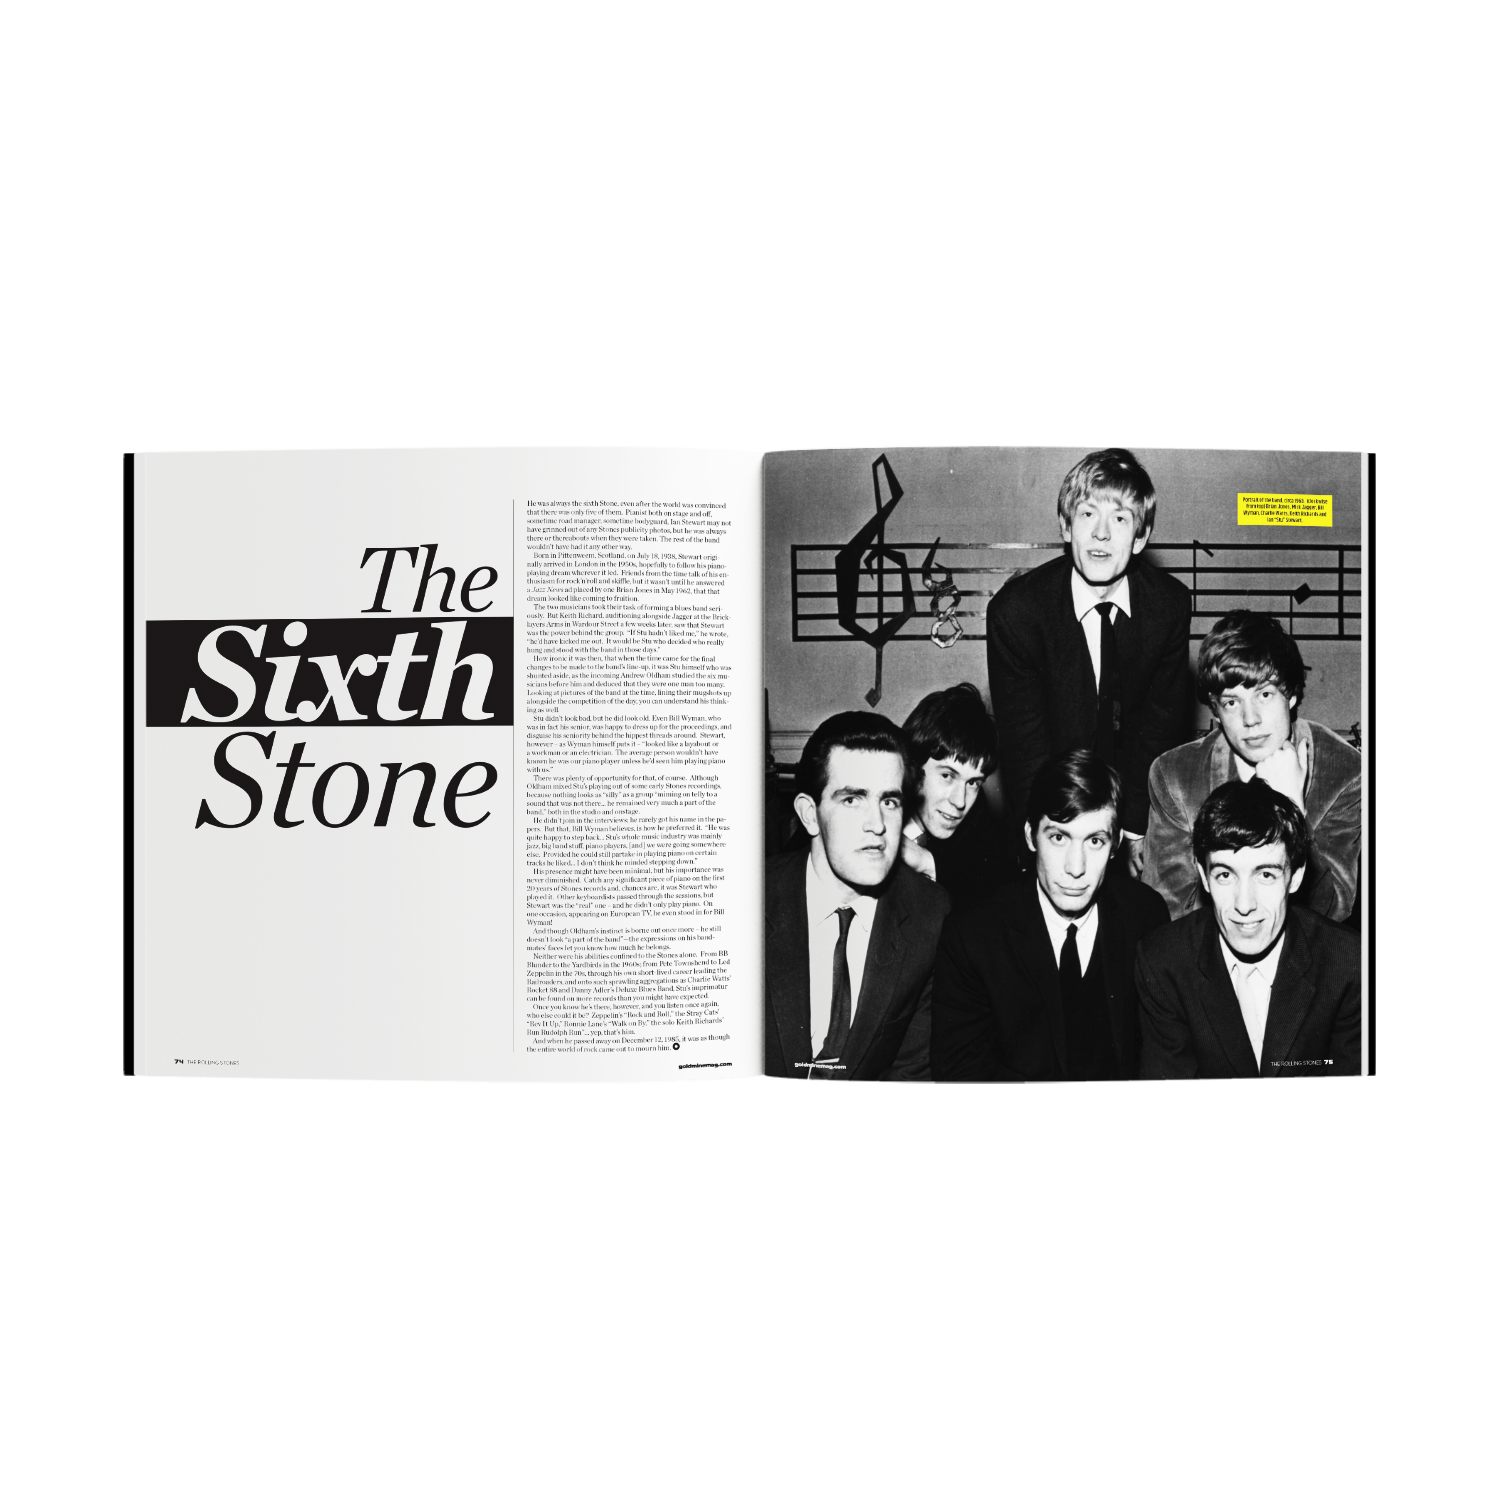 THE ROLLING STONES x GOLDMINE "EARLY YEARS" SPECIAL COLLECTOR’S EDITION SOFTCOVER BOOK w/THE ROLLING STONES ’12x5’ LP (Exclusive Limited Edition - Gold Vinyl)